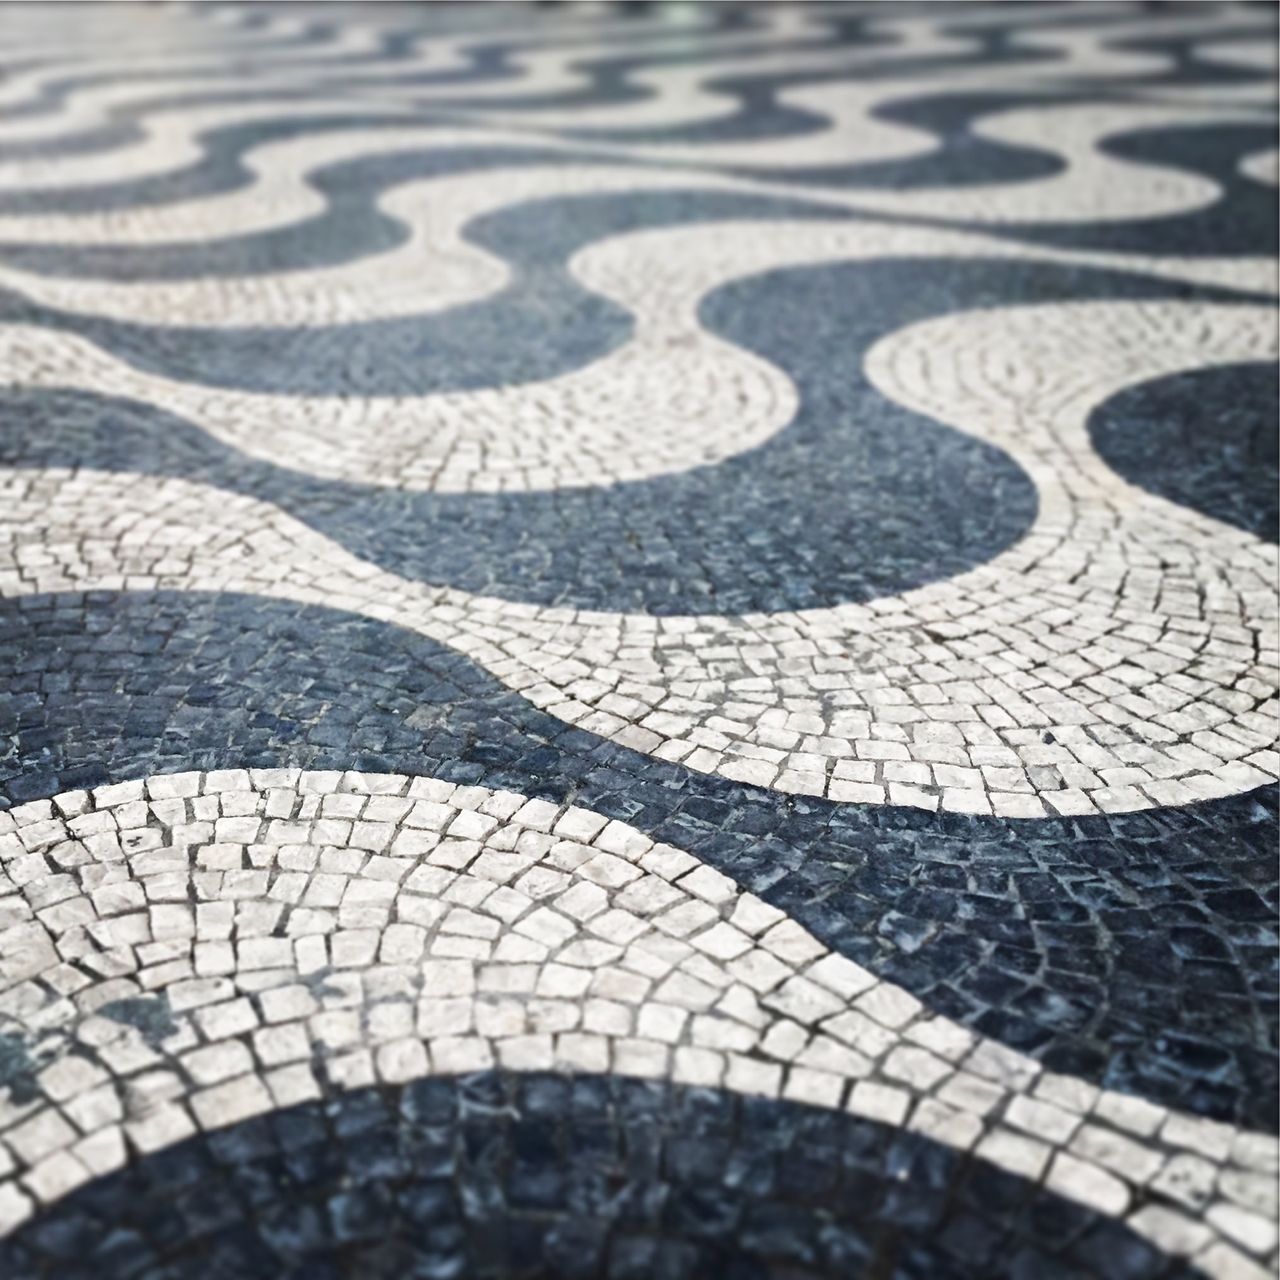 Detailed, patterned stone work in a city square.